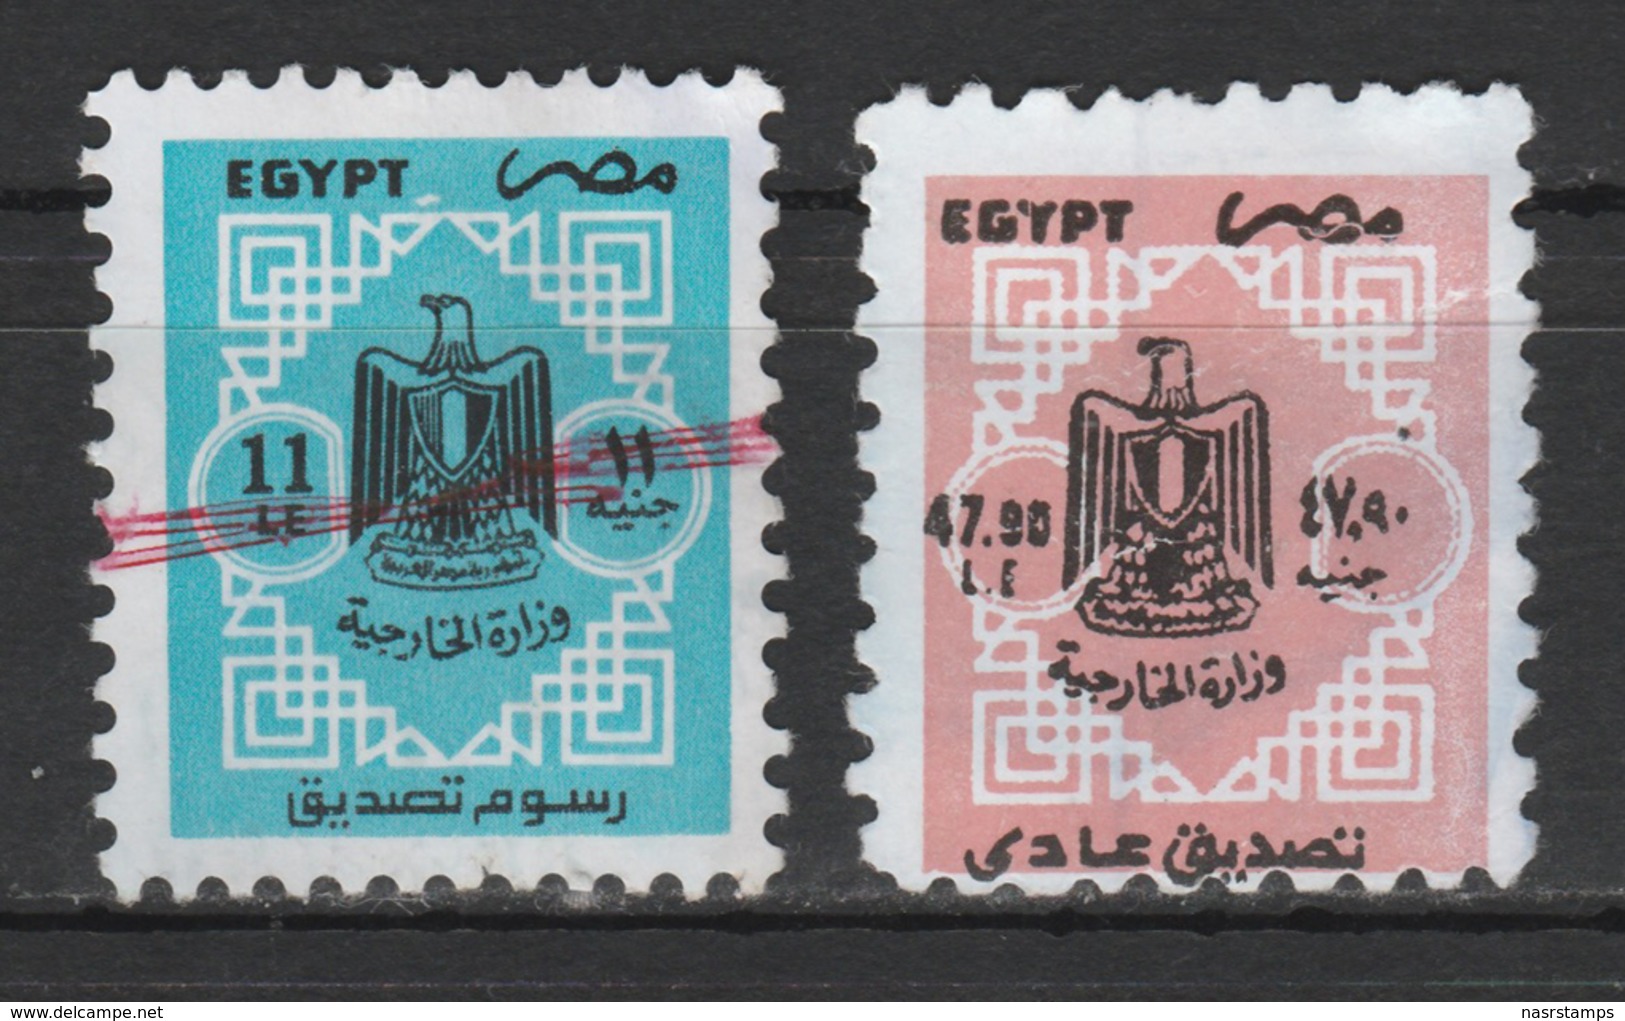 Egypt - Rare - ( Old Revenue - Ministry Of Foreign Affairs - 11 & 47.90 EGP ) Used - Usados